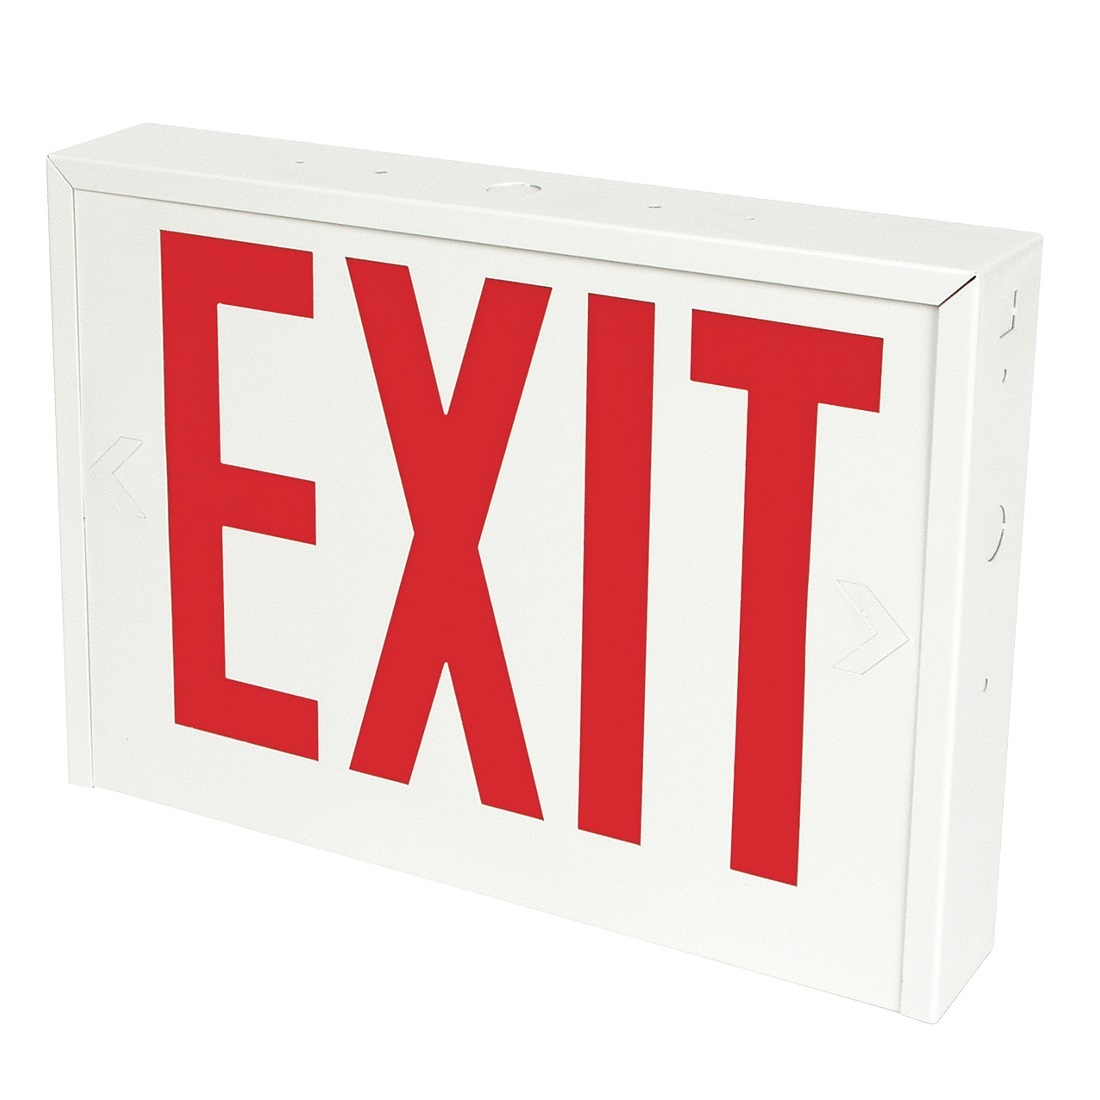 NEW YORK CITY COMPLIANT STEEL EXIT SIGN NYXTEU